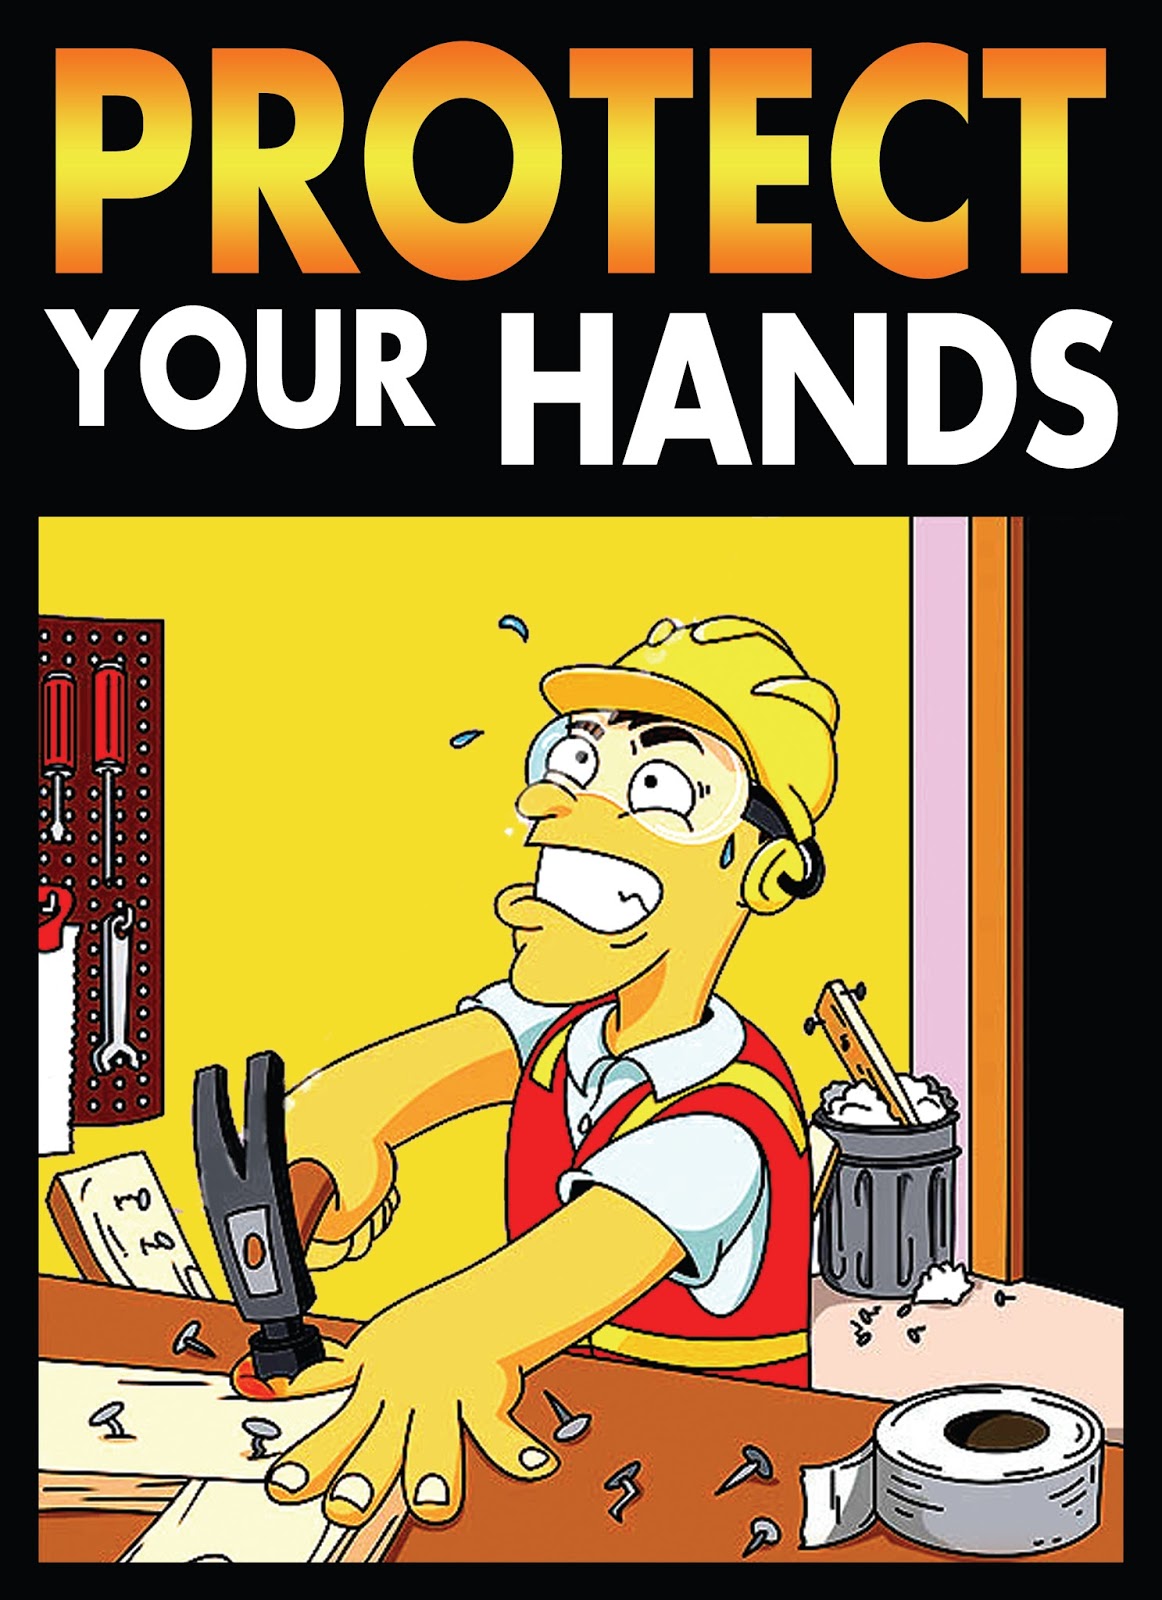 Safety Poster Hd